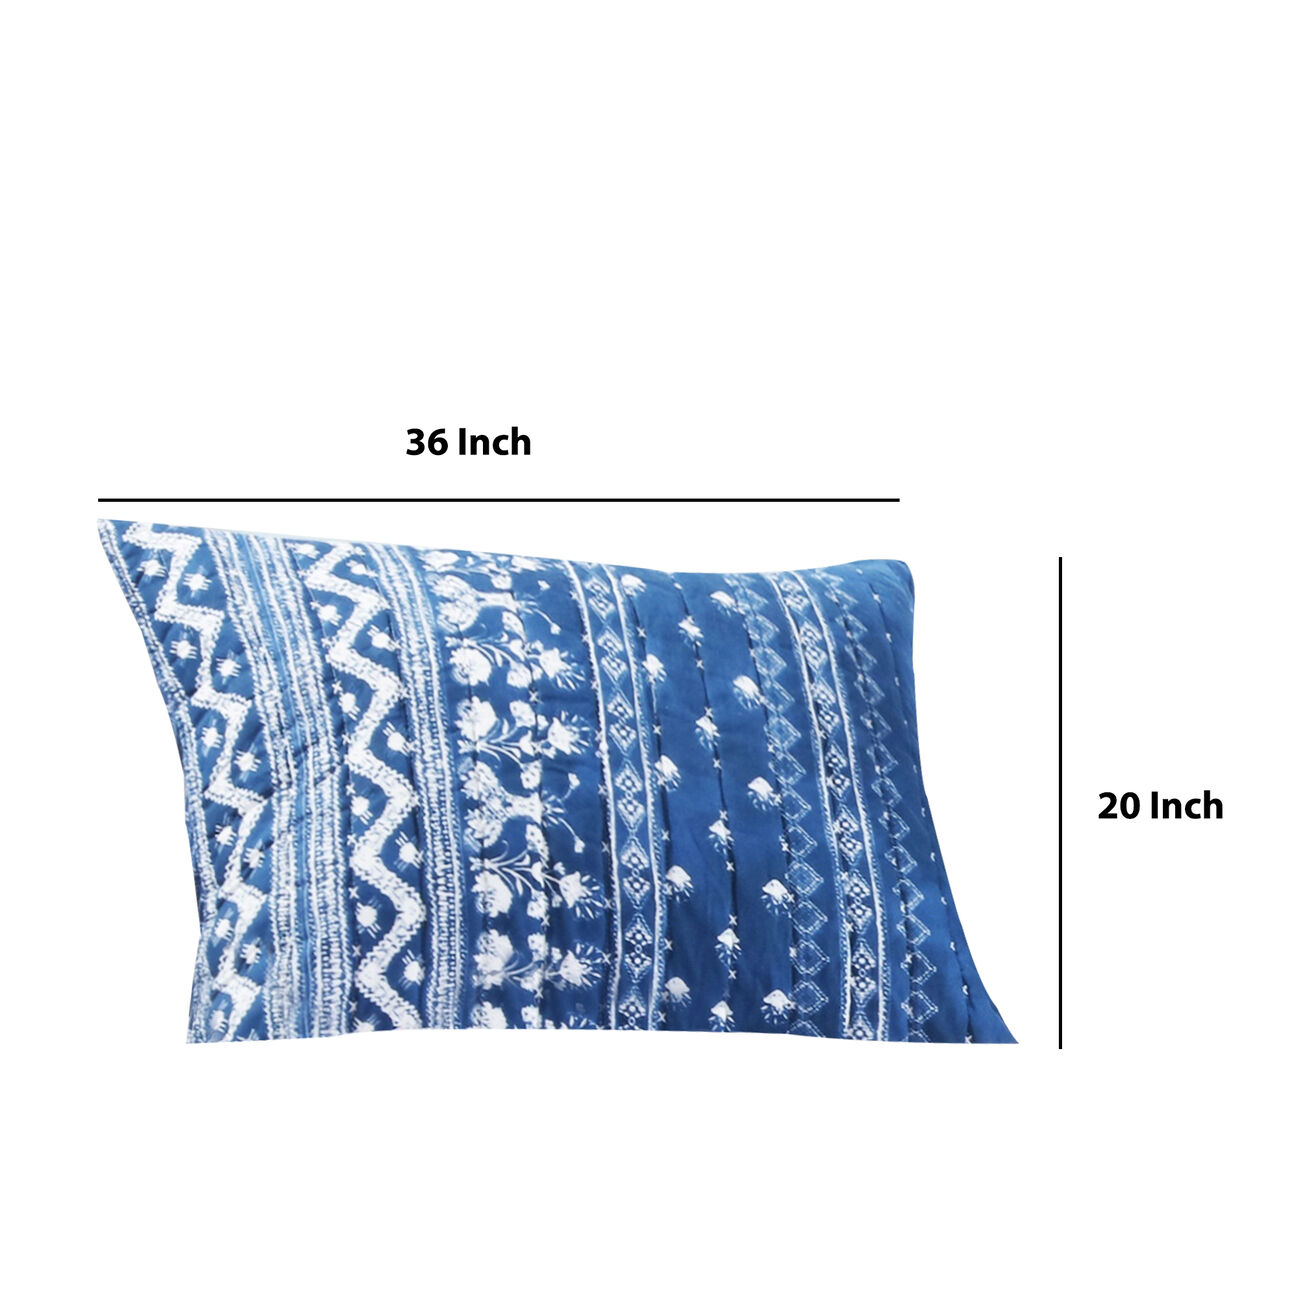 20 X 36 Geometric Pattern Pillow Sham with Polyester Filling, Blue